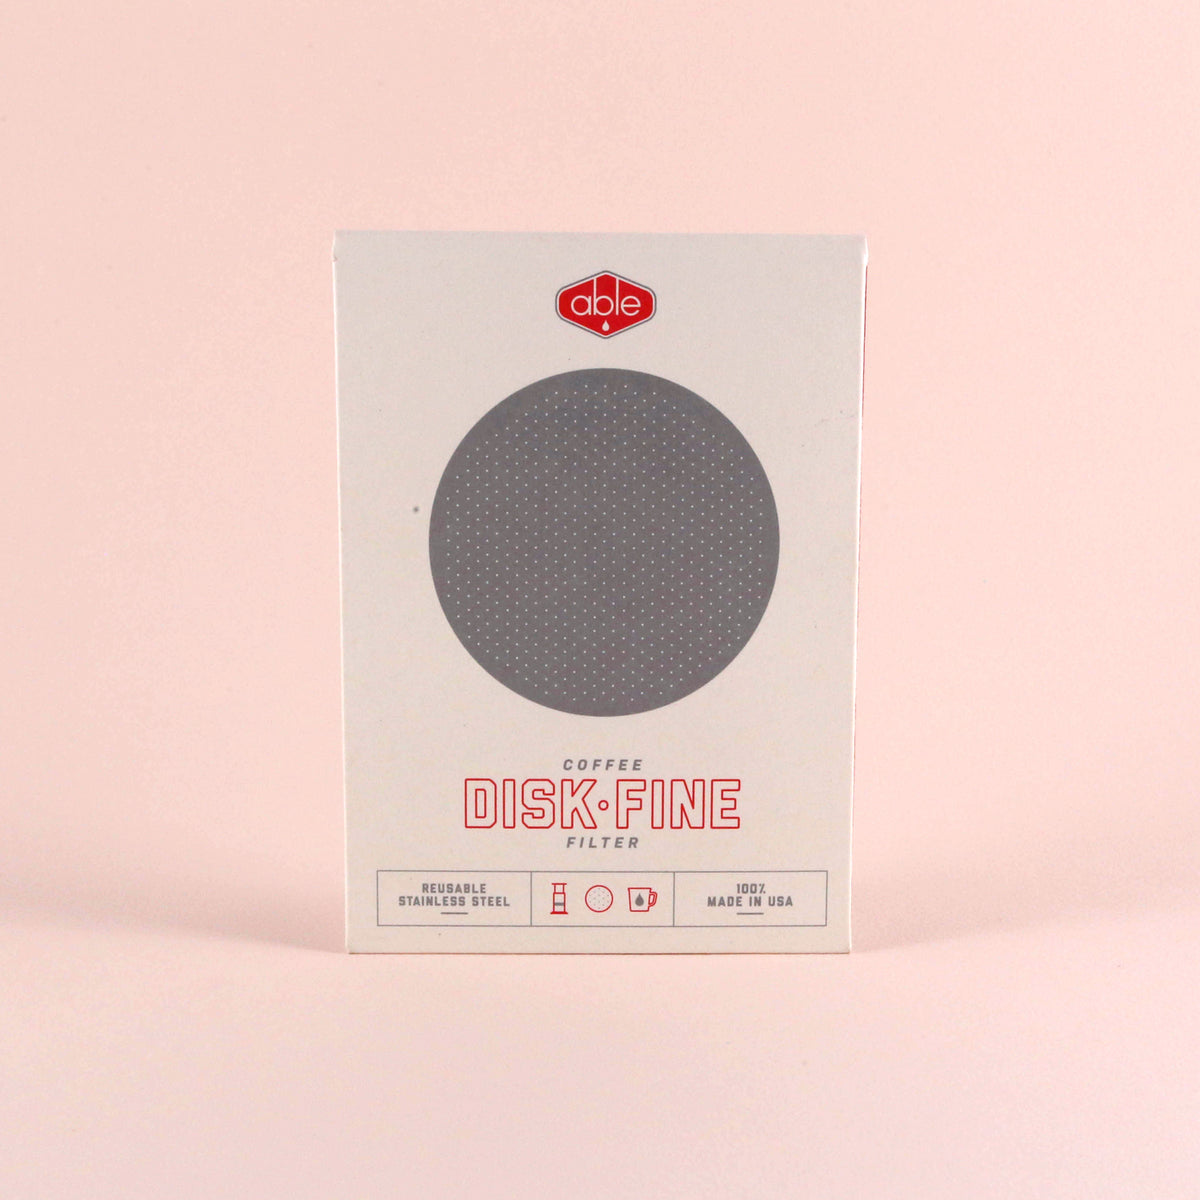 Tandem Coffee Roasters' Able Aeropress Filter Disk (Fine) packaging on a soft pink background. The box displays the circular filter through a round cutout and includes product details.